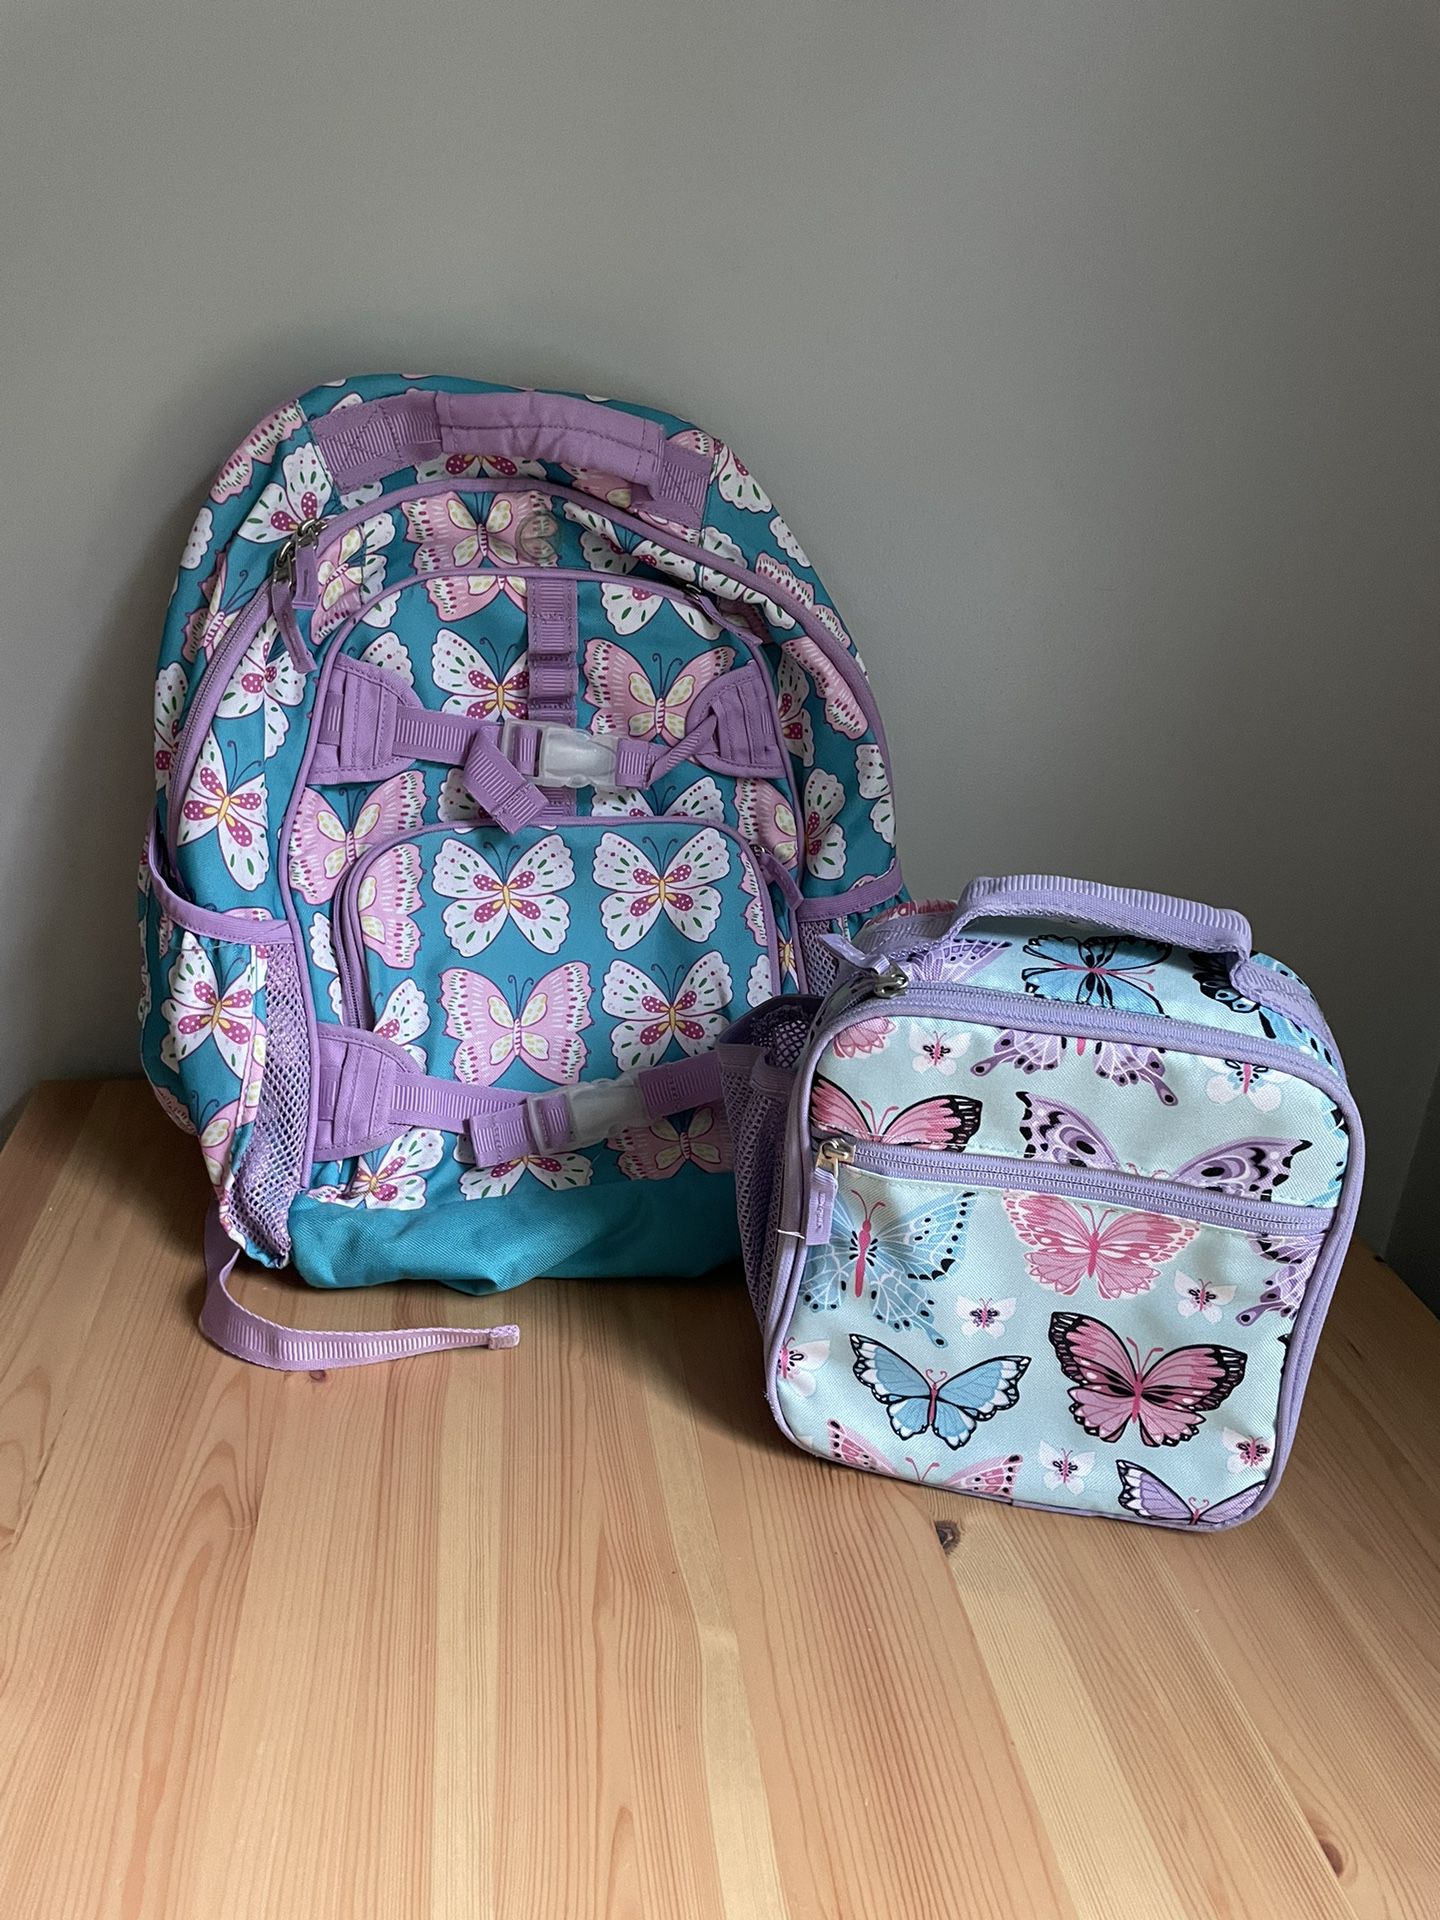 Pottery Barn Kids Backpack And Lunchbox Girls Butterflies Back to